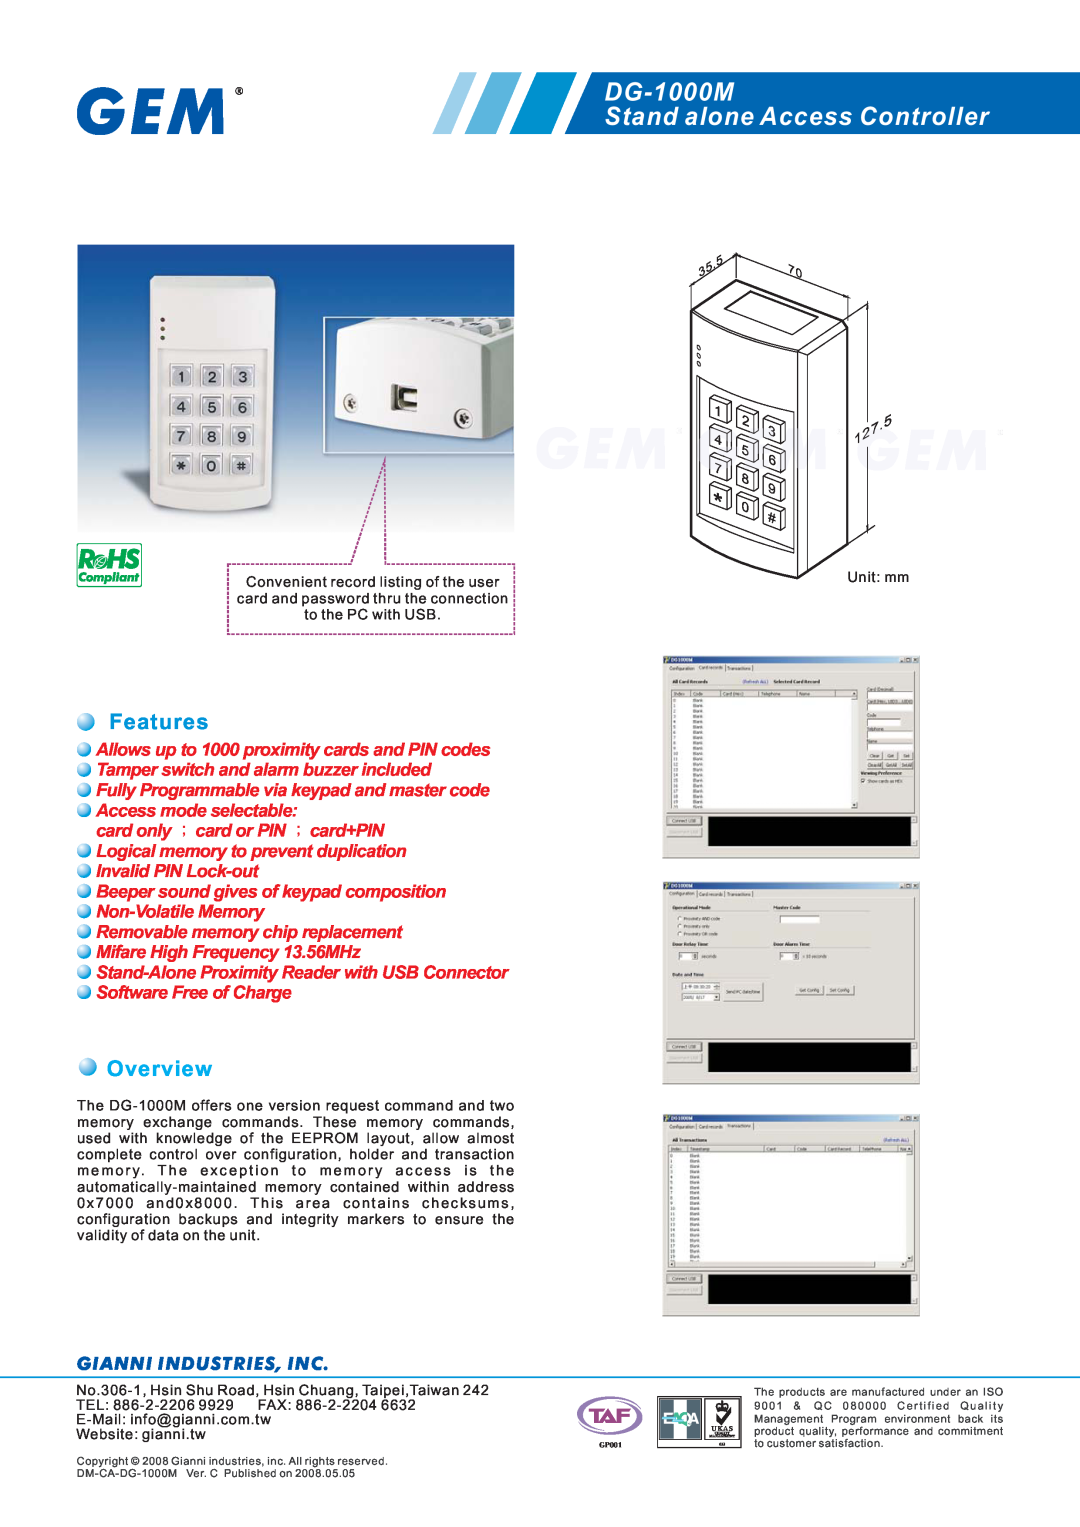 Gianni Industries manual DG-1000M Stand alone Access Controller, Features, Overview, Gianni Industries, Inc 